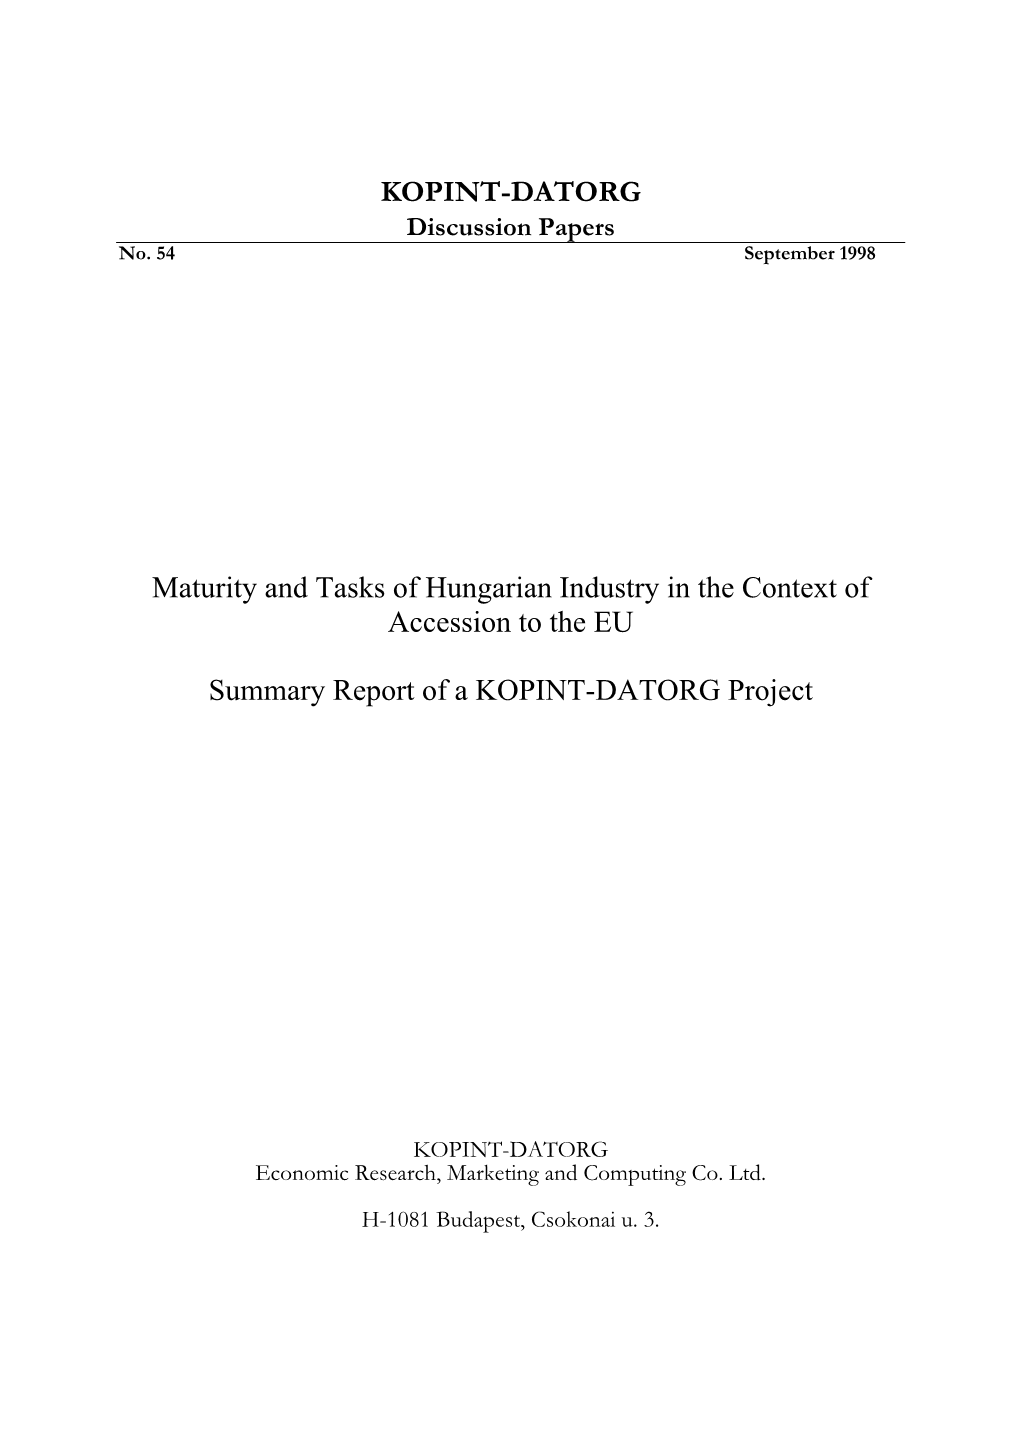 KOPINT-DATORG Discussion Papers No